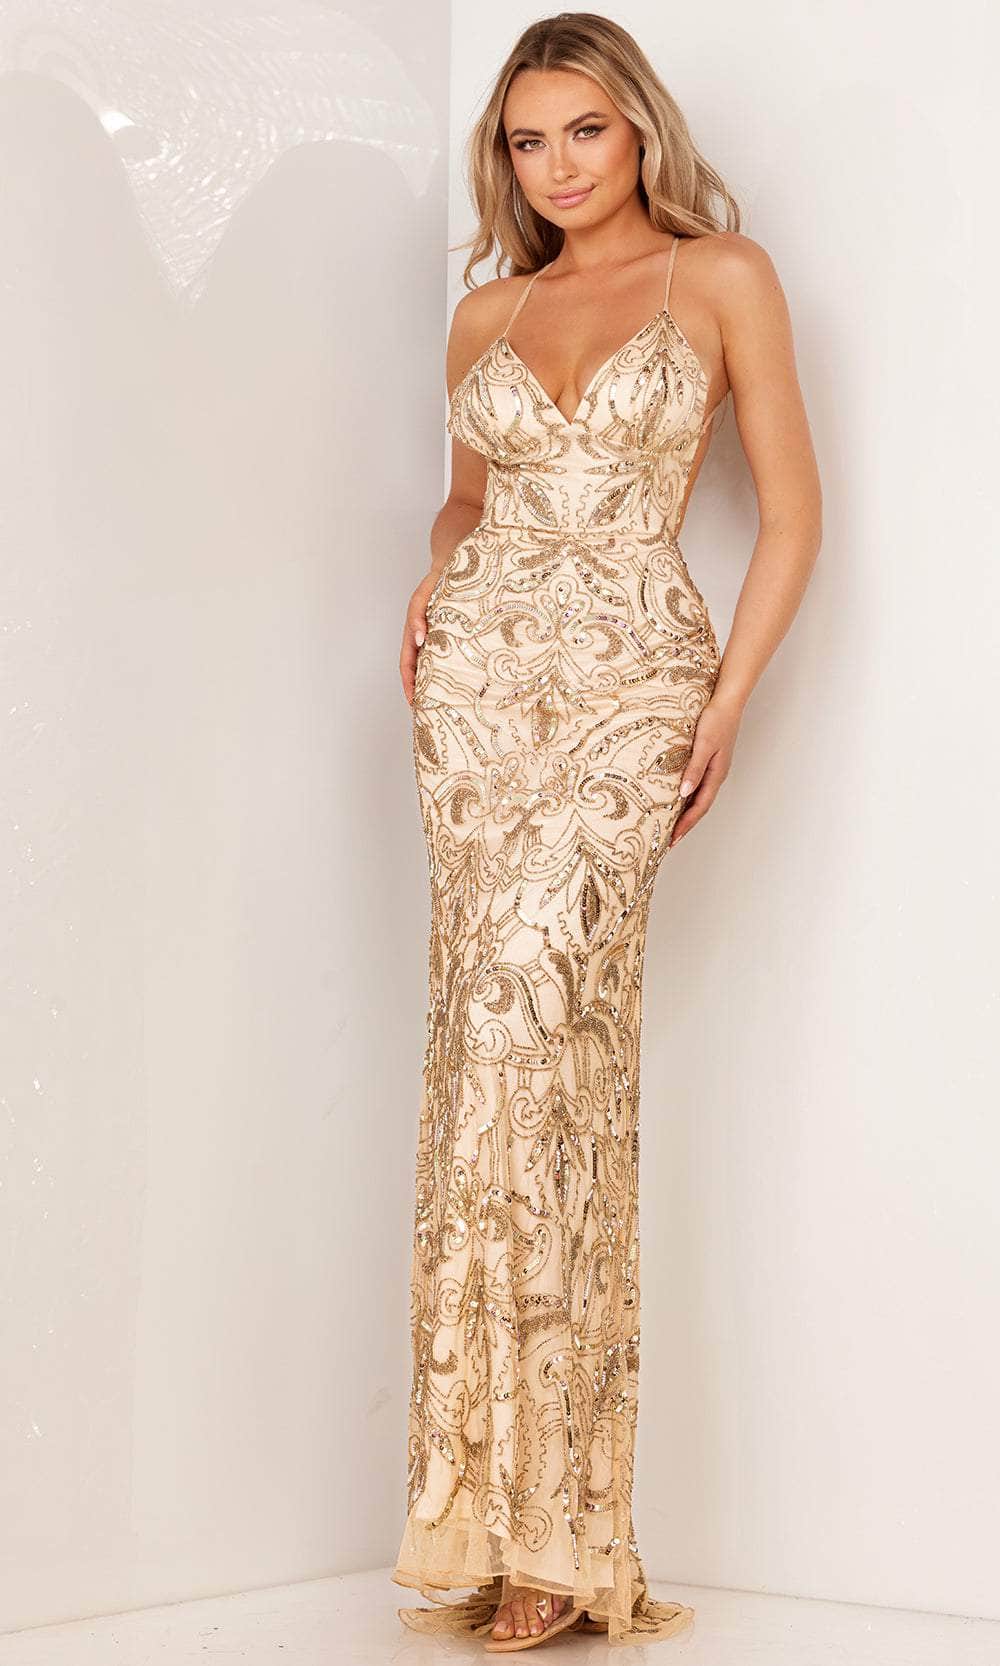 Aleta Couture 196 - Fitted Spaghetti Straps Evening Dress Evening Dresses